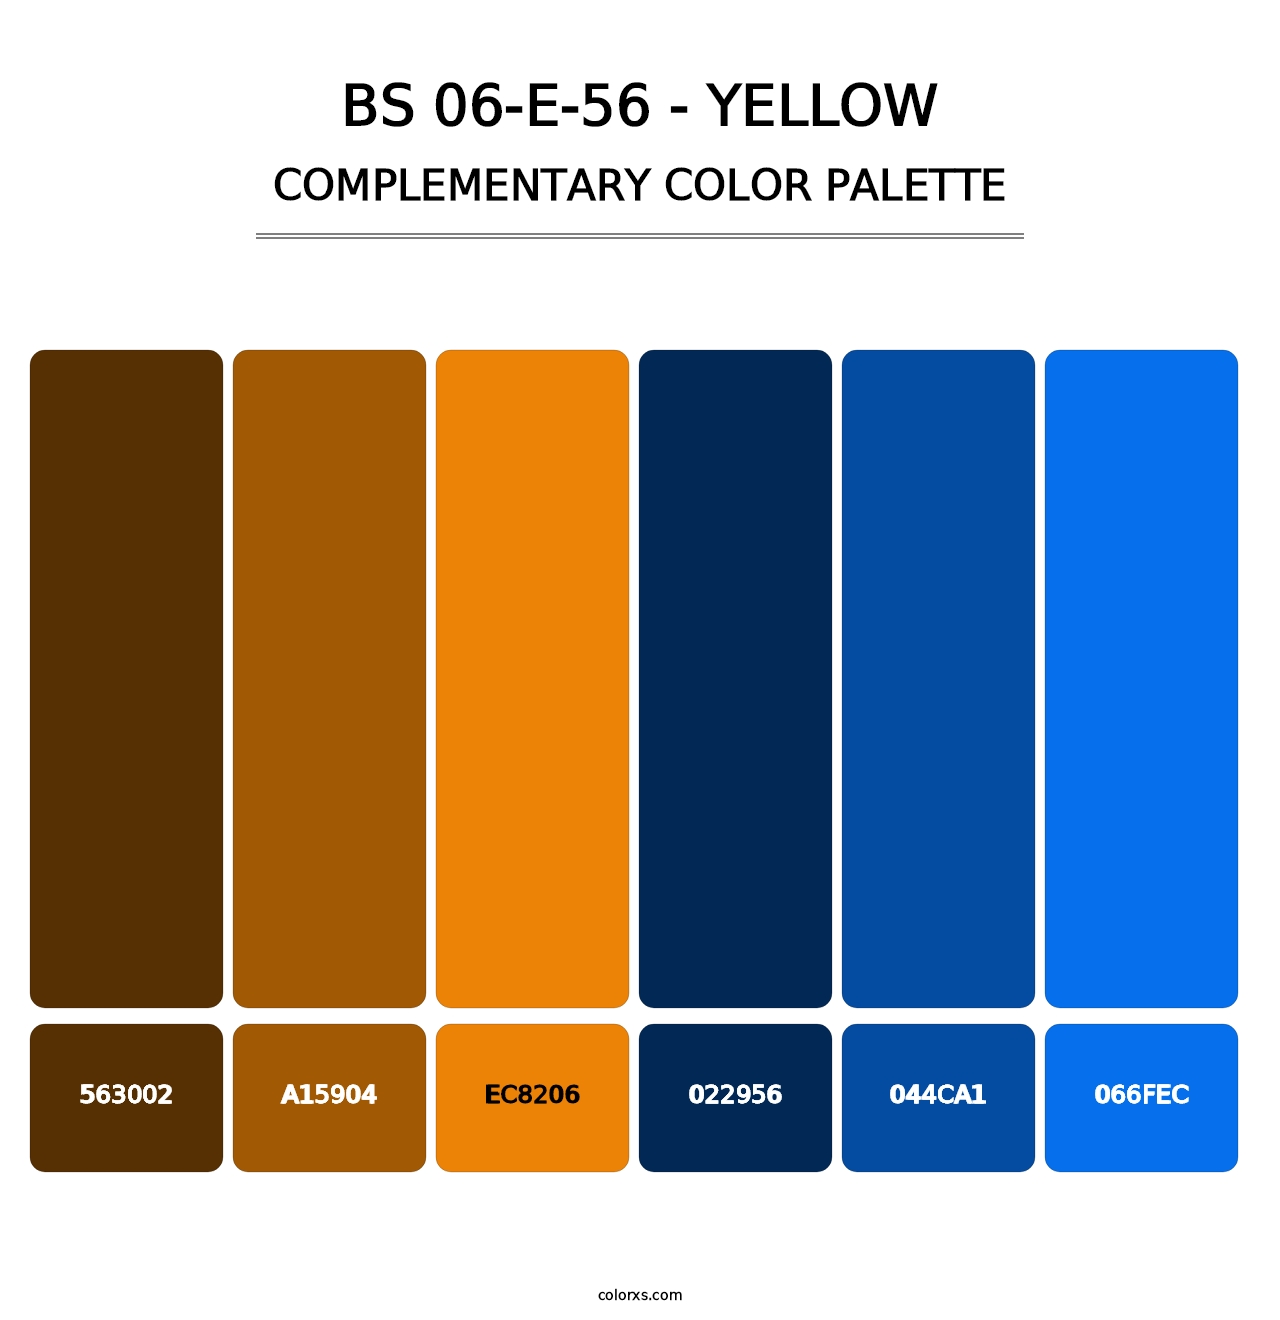 BS 06-E-56 - Yellow - Complementary Color Palette